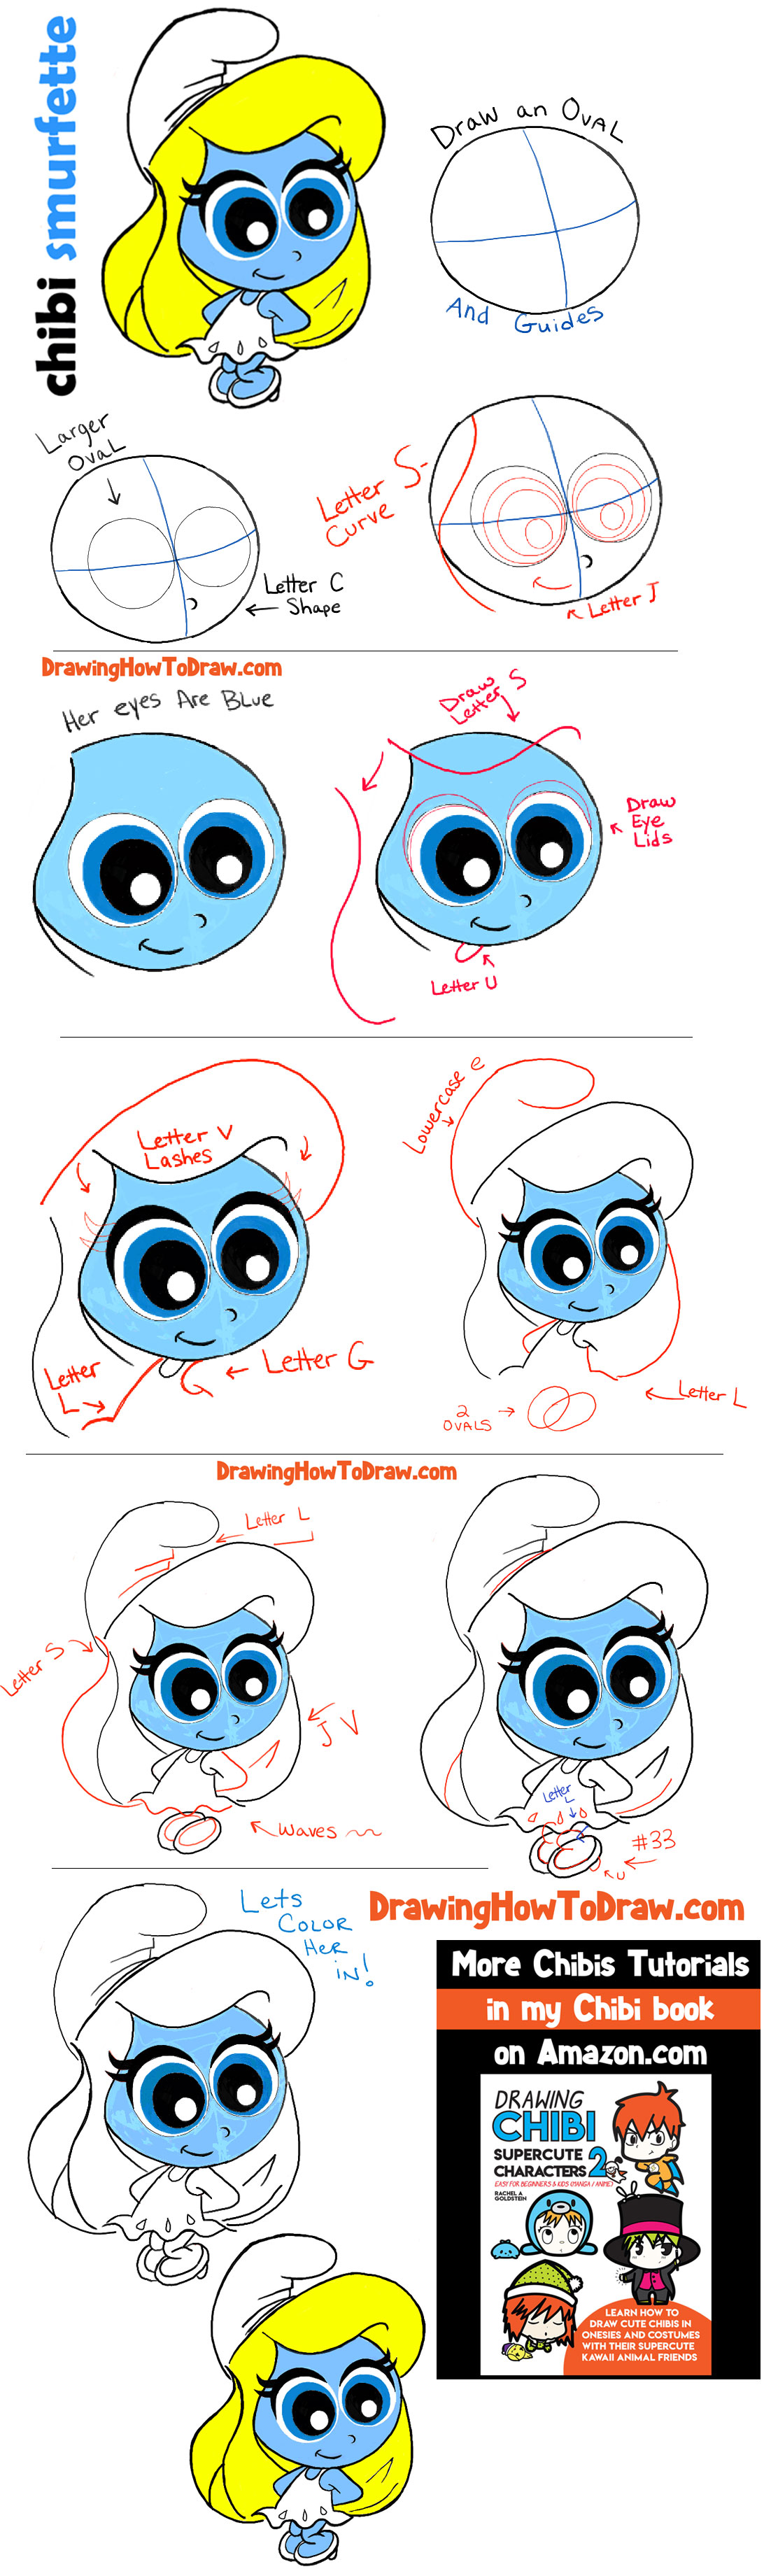 Drawing Tutorial for Learning How to Draw Chibi Smurfette or Baby Smurfette from The Smurfs